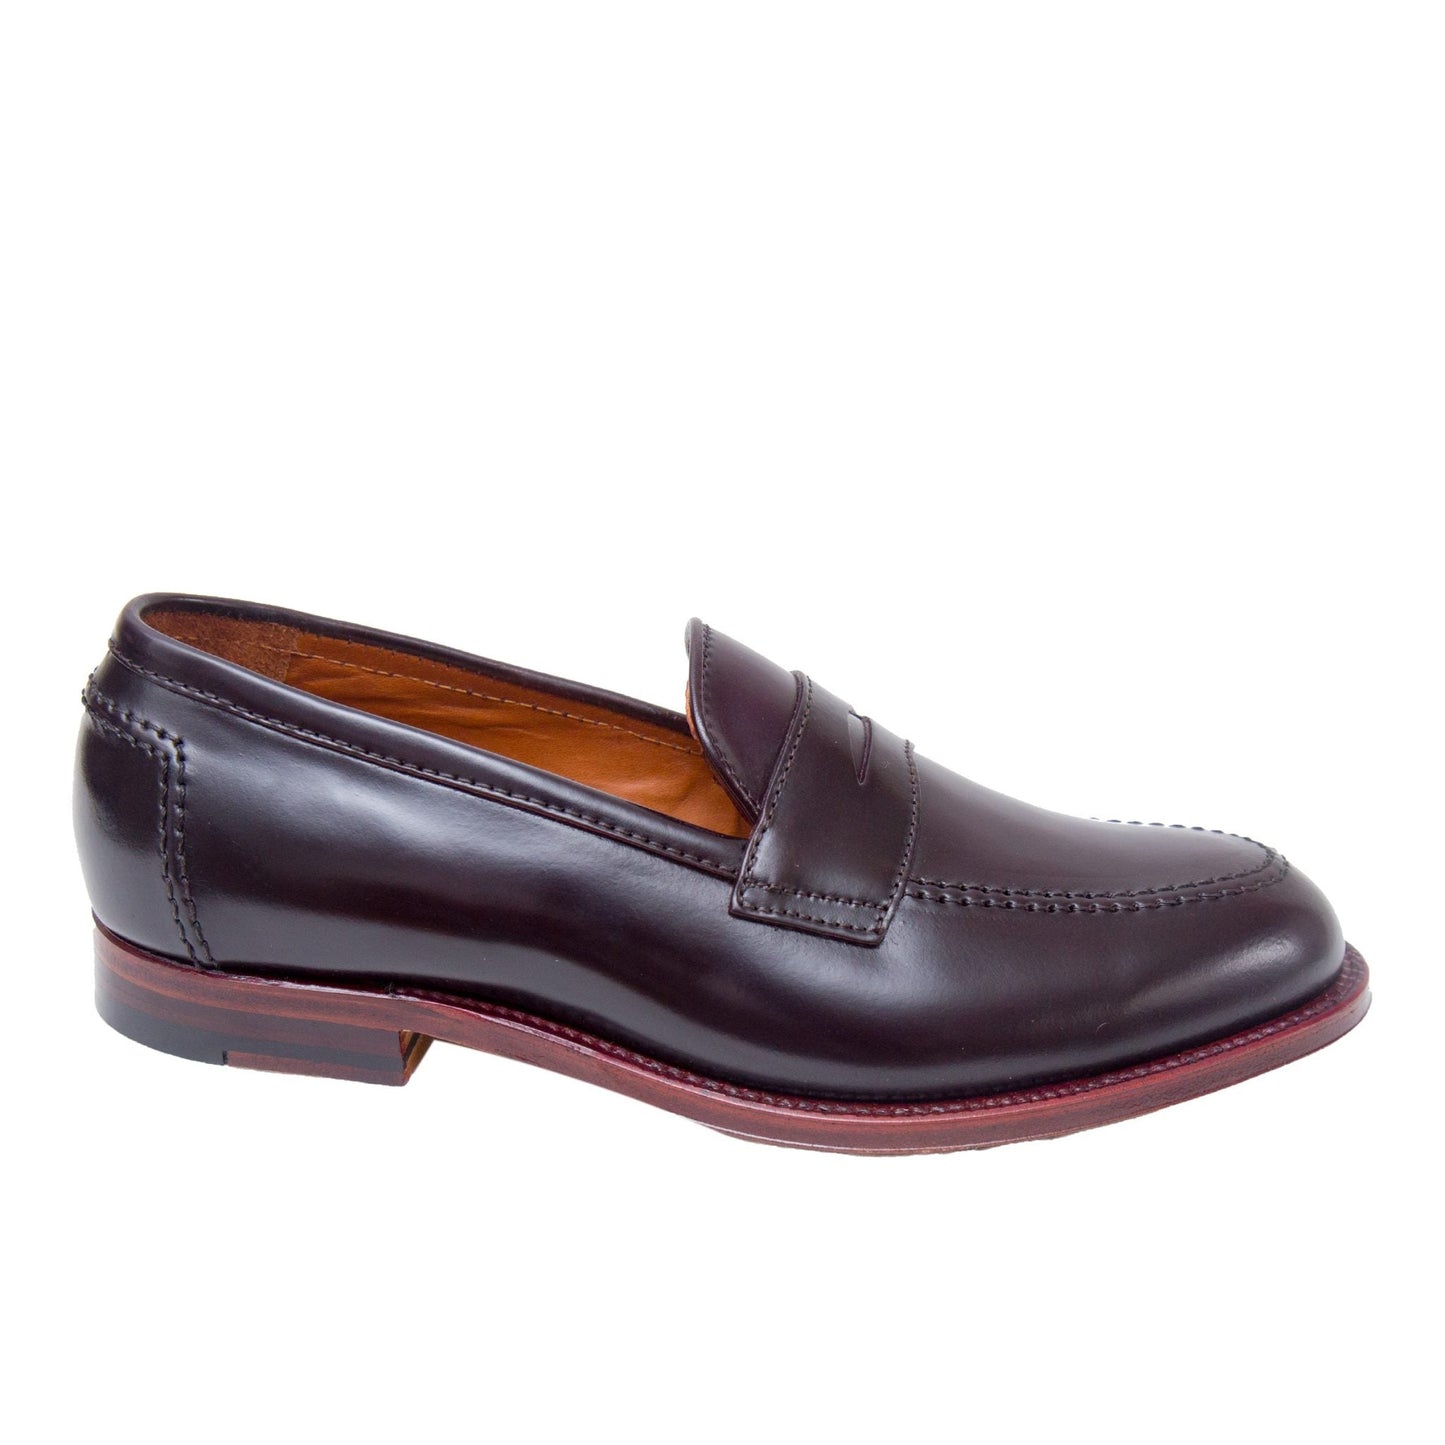 96288 - Madison Penny in Color 8 Shell Cordovan (deposit)